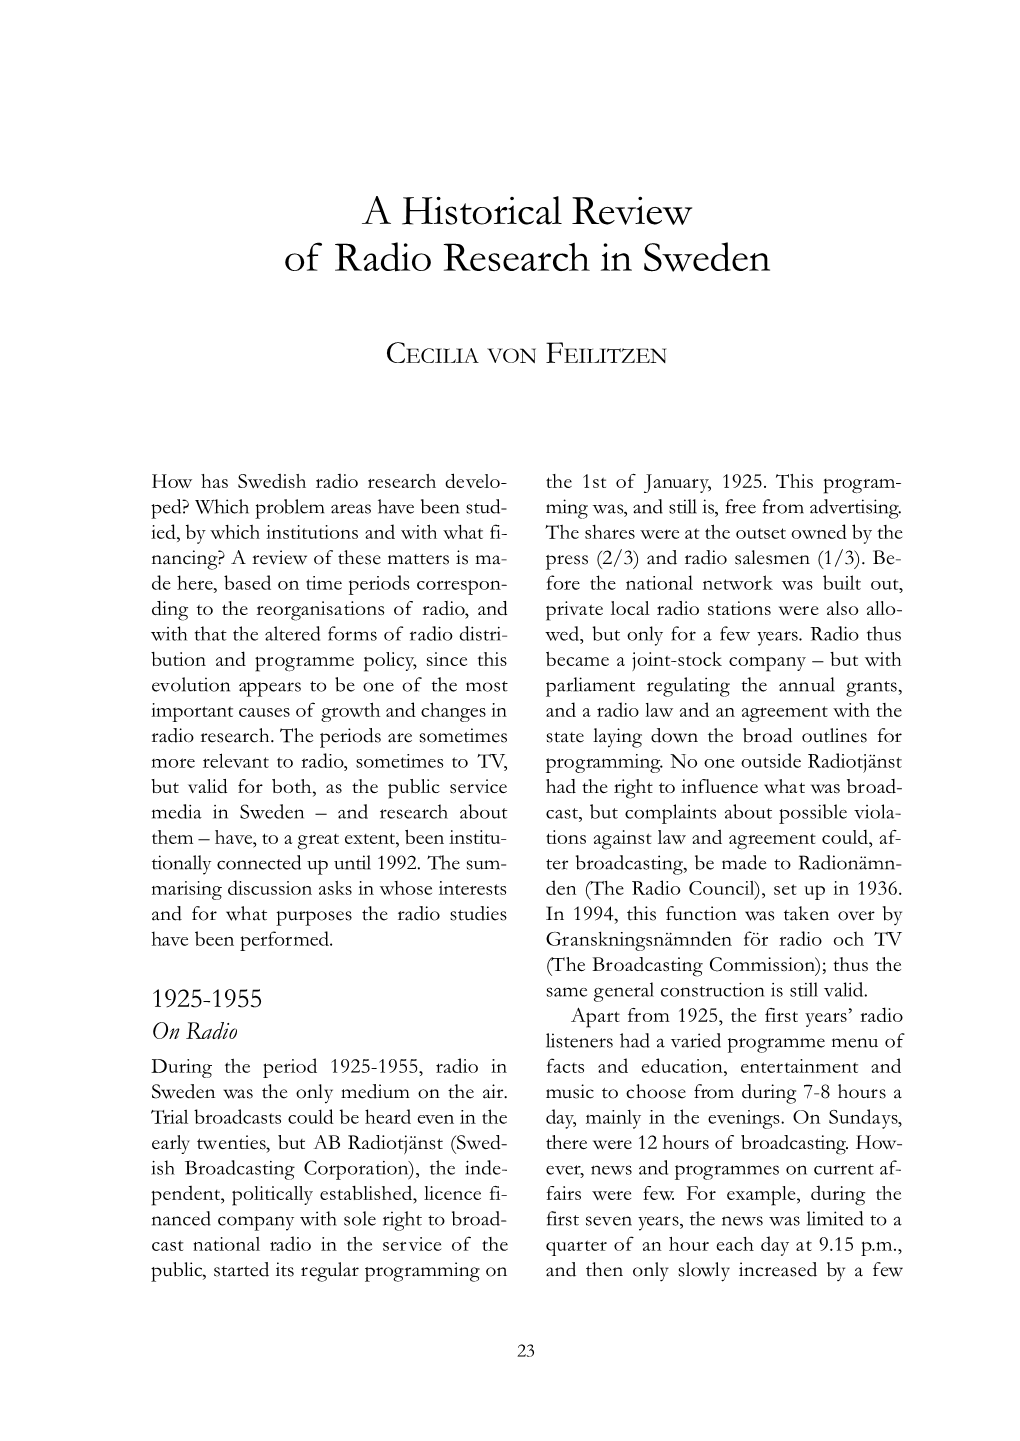 A Historical Review of Radio Research in Sweden